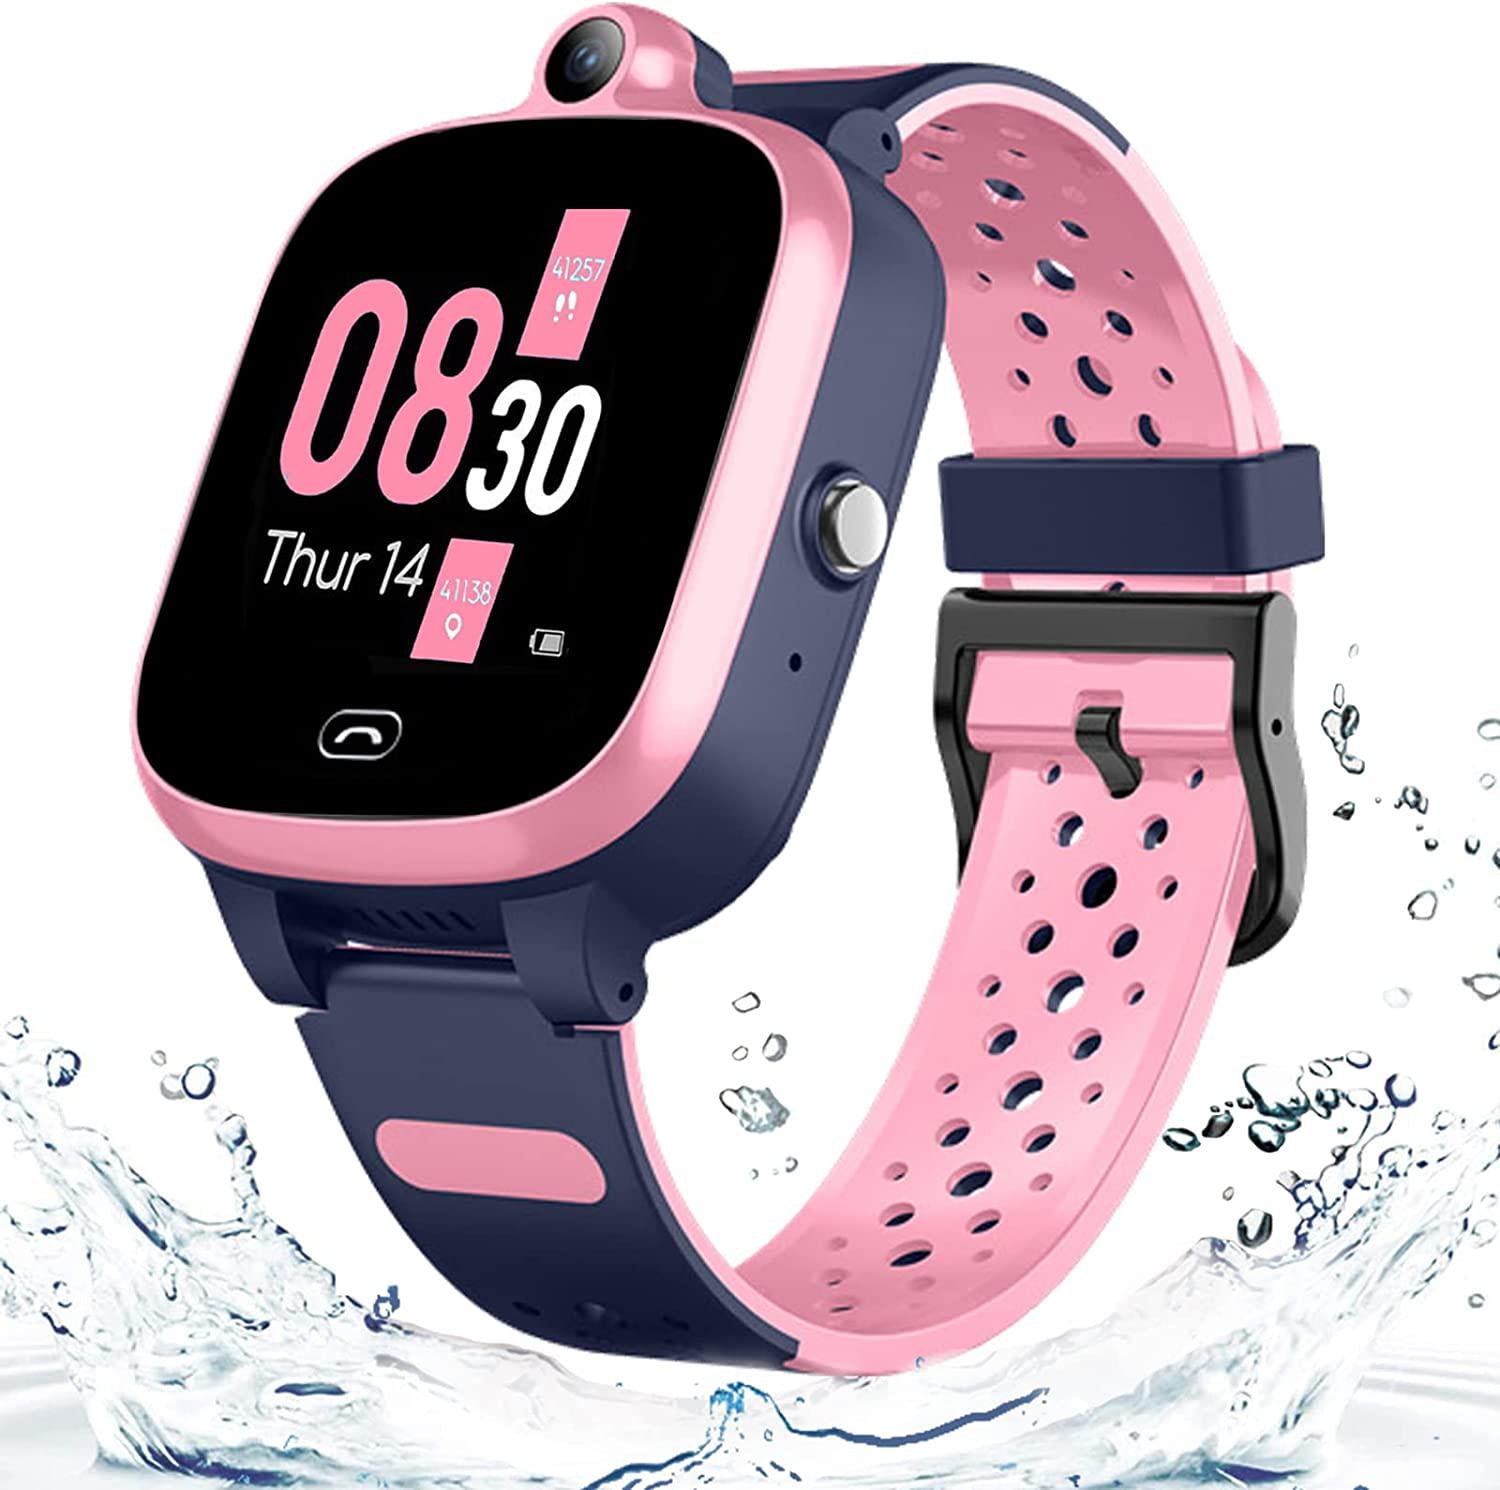 TOPUSER, Kids 4G GPS Smart Watch, Waterproof Phone Smartwatch, TOPUSER Video Phone Call Real-time Tracking Camera SOS Alarm Geo-Fence Touch Screen Pedometer Anti-Lost GPS Tracker Watch for Birthday Gift(Pink)